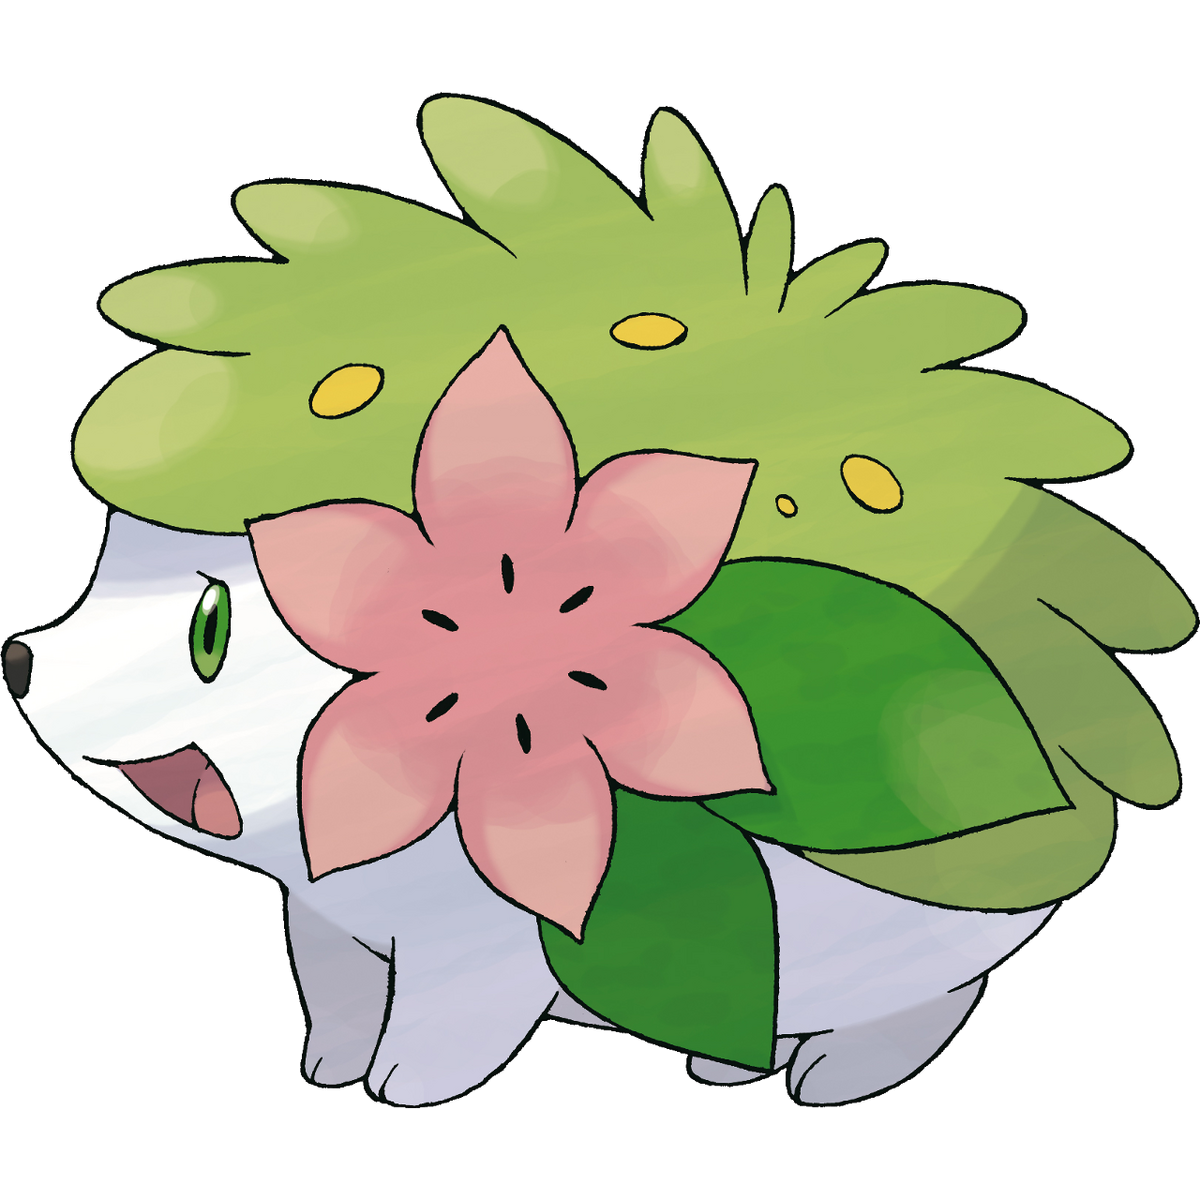 Shiny 6IV Shaymin in Land and Sky forms Legendary Pokemon for